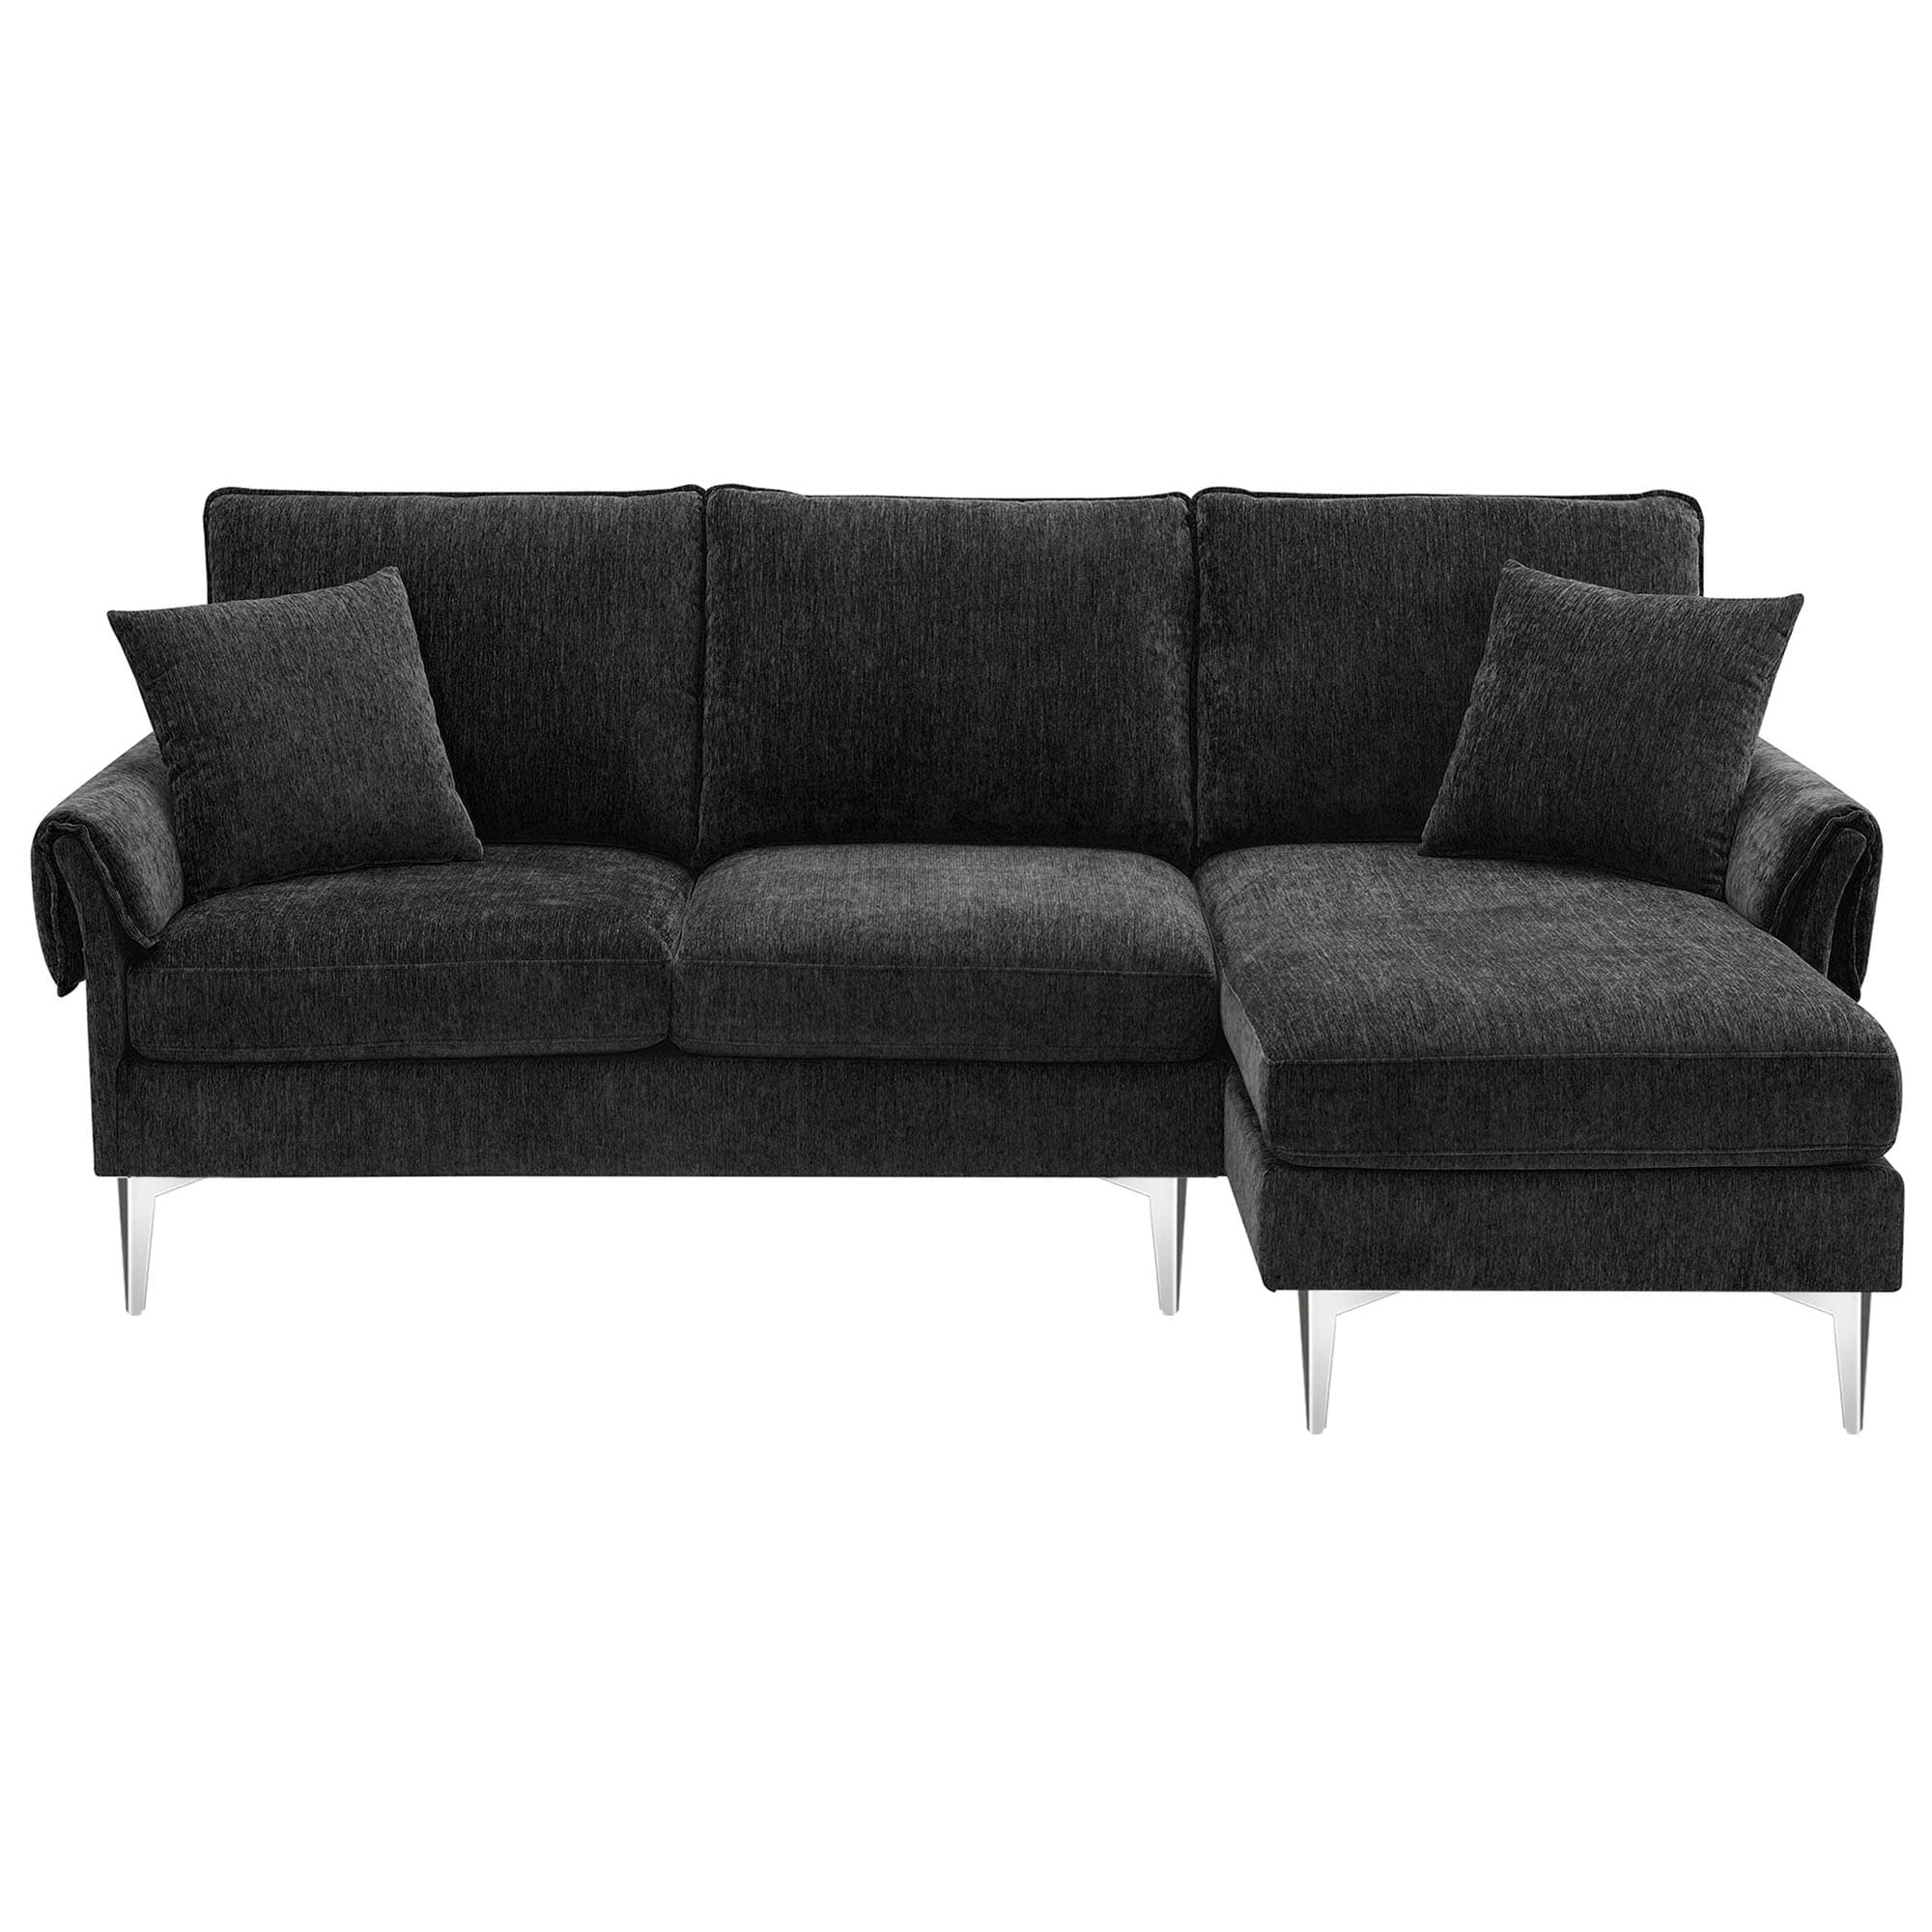 L-shape Chenille Sofa Set with Reversible Chaise Couch and Pillows